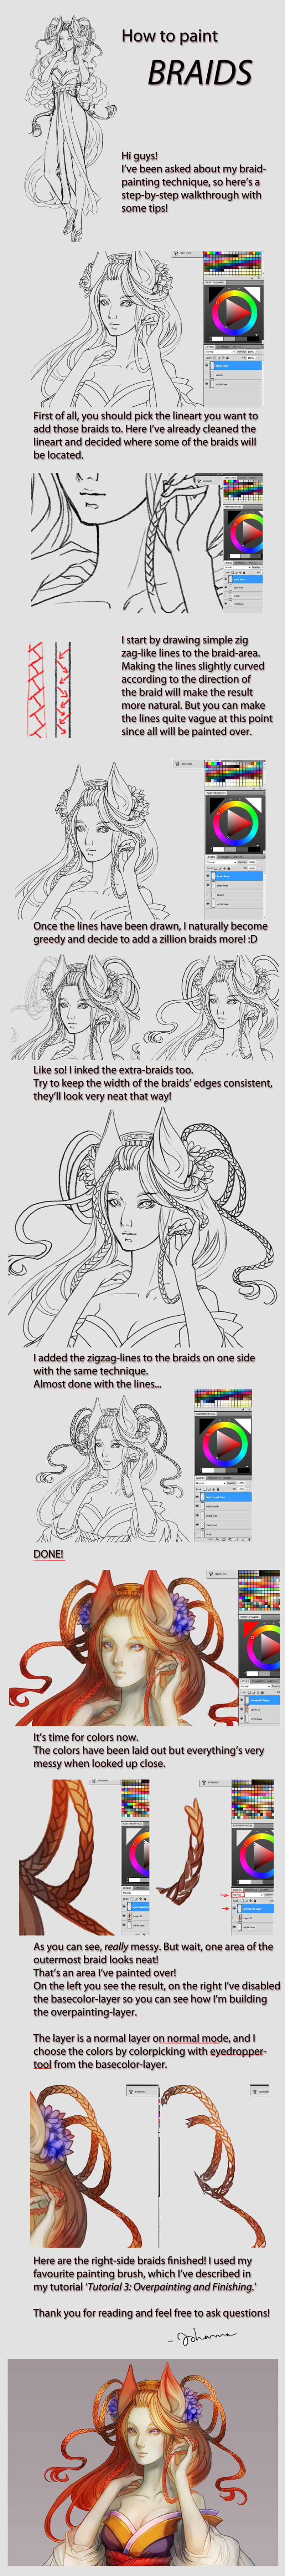 How to paint BRAIDS by juuhanna on DeviantArt